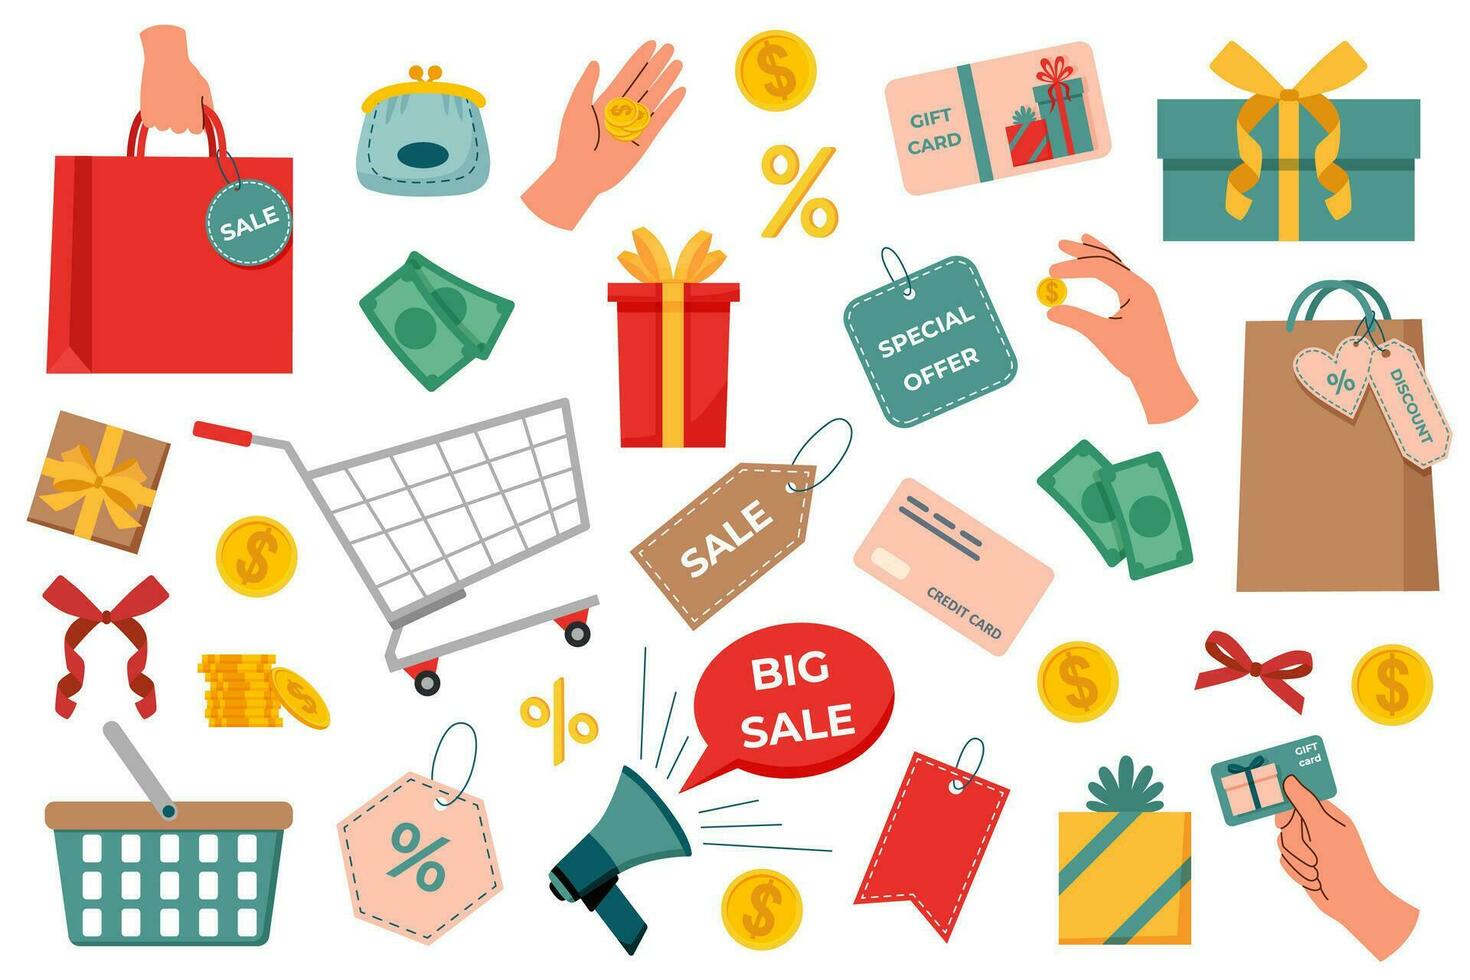 Sale objects set vector